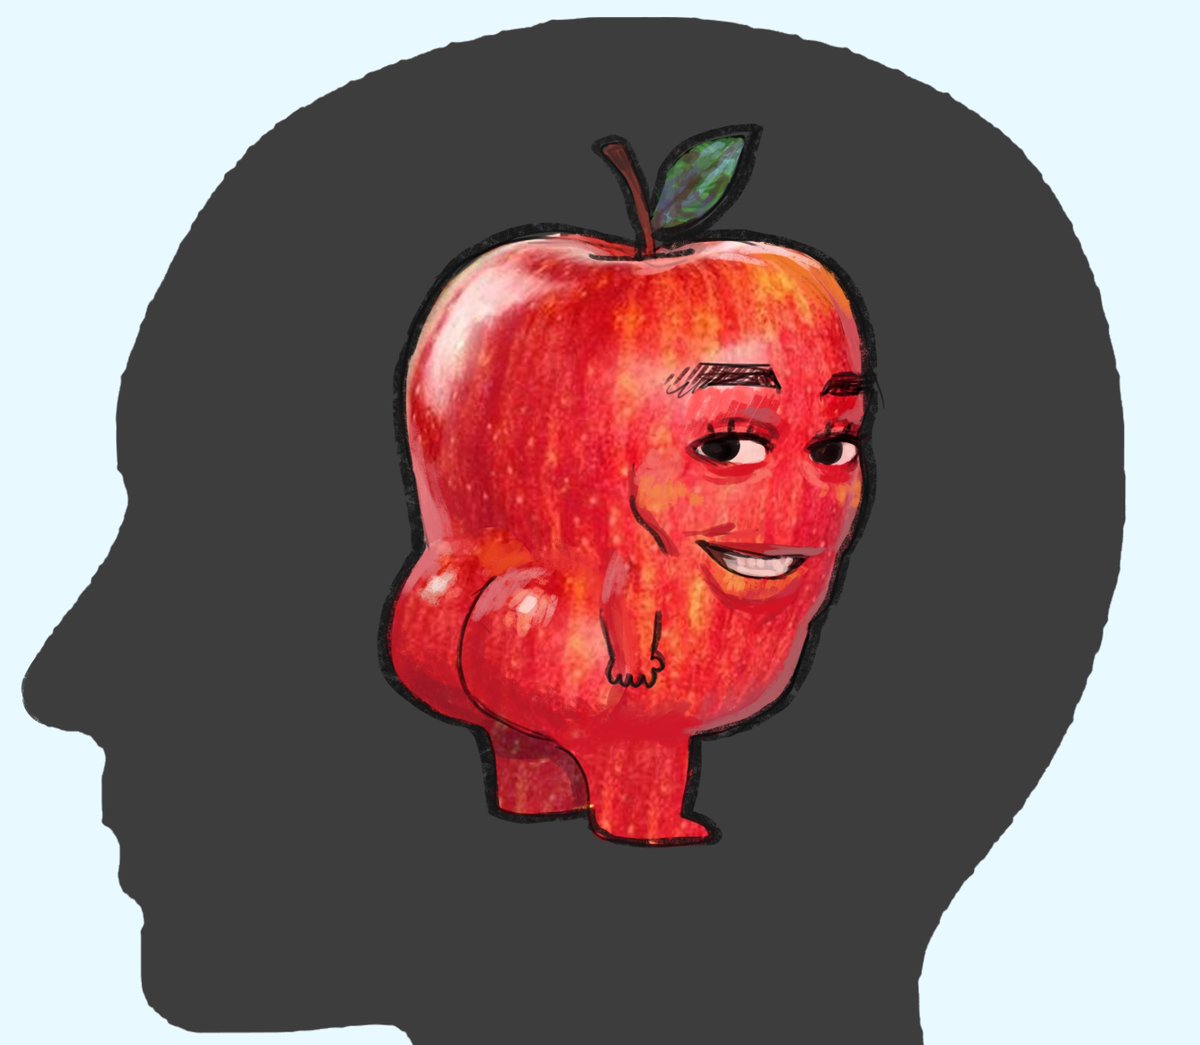 「my apple is looking me weird.  」|Wallace Piresのイラスト